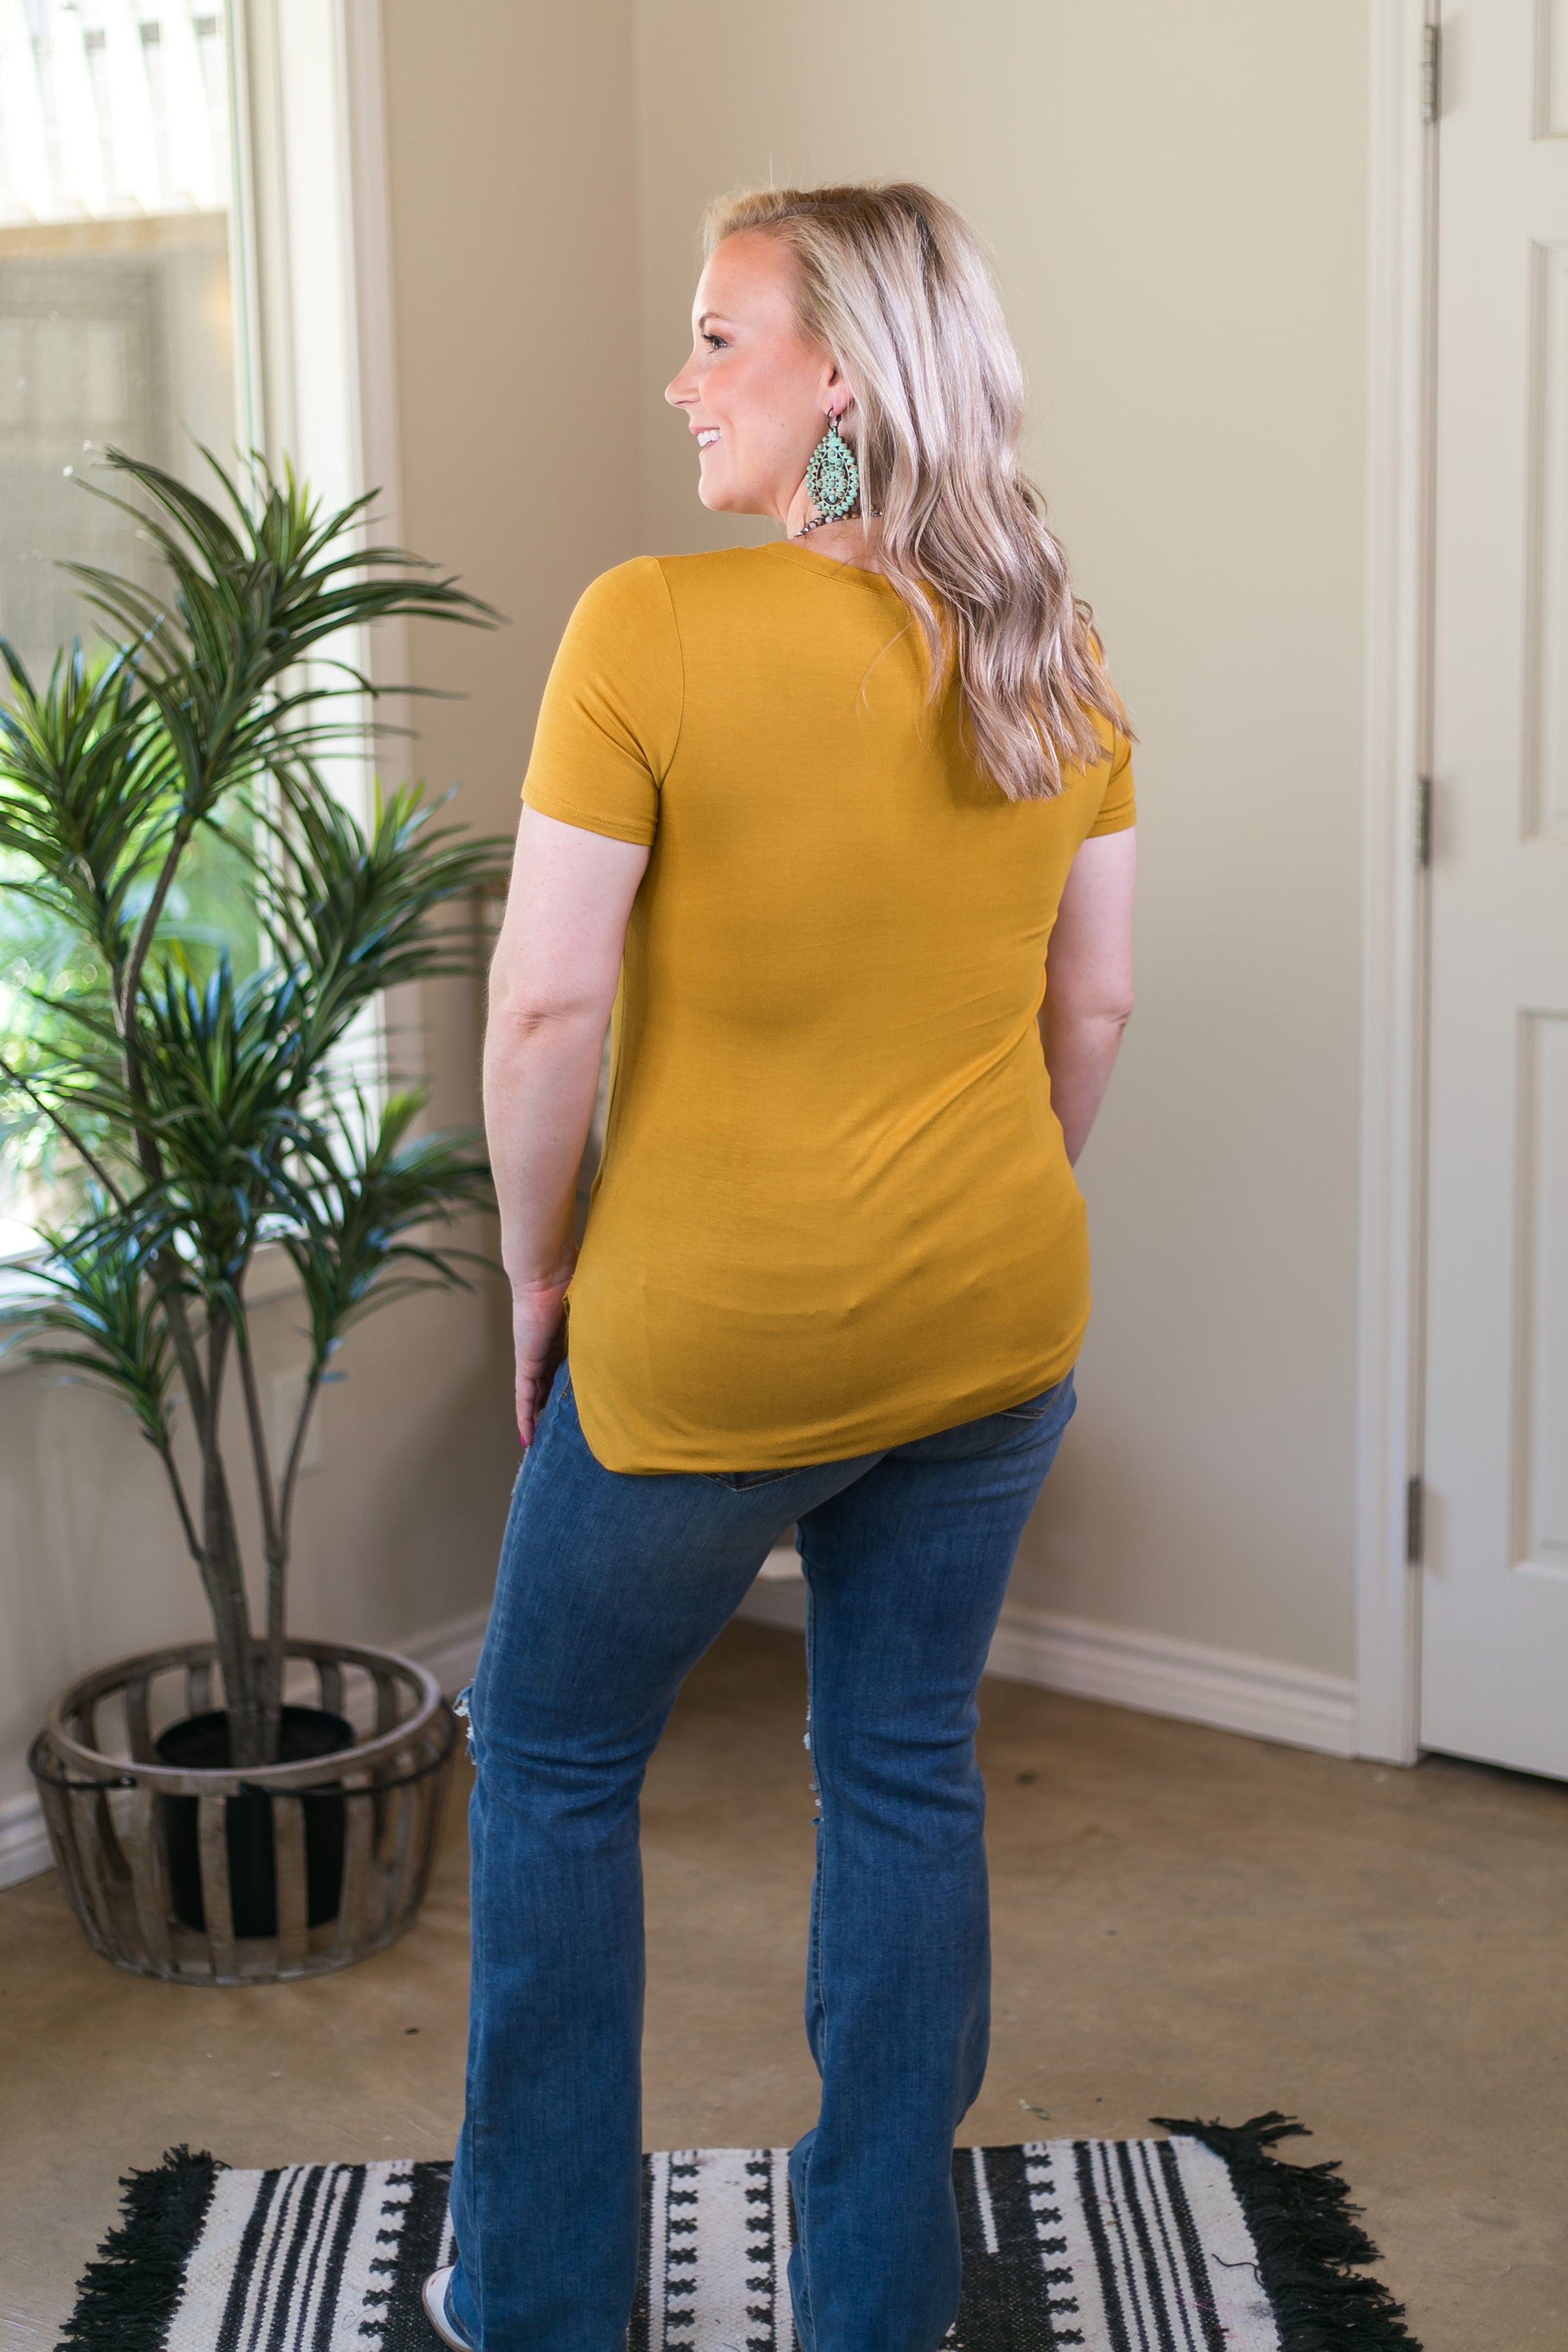 Simply The Best V Neck Short Sleeve Tee Shirt in Mustard Yellow - Giddy Up Glamour Boutique